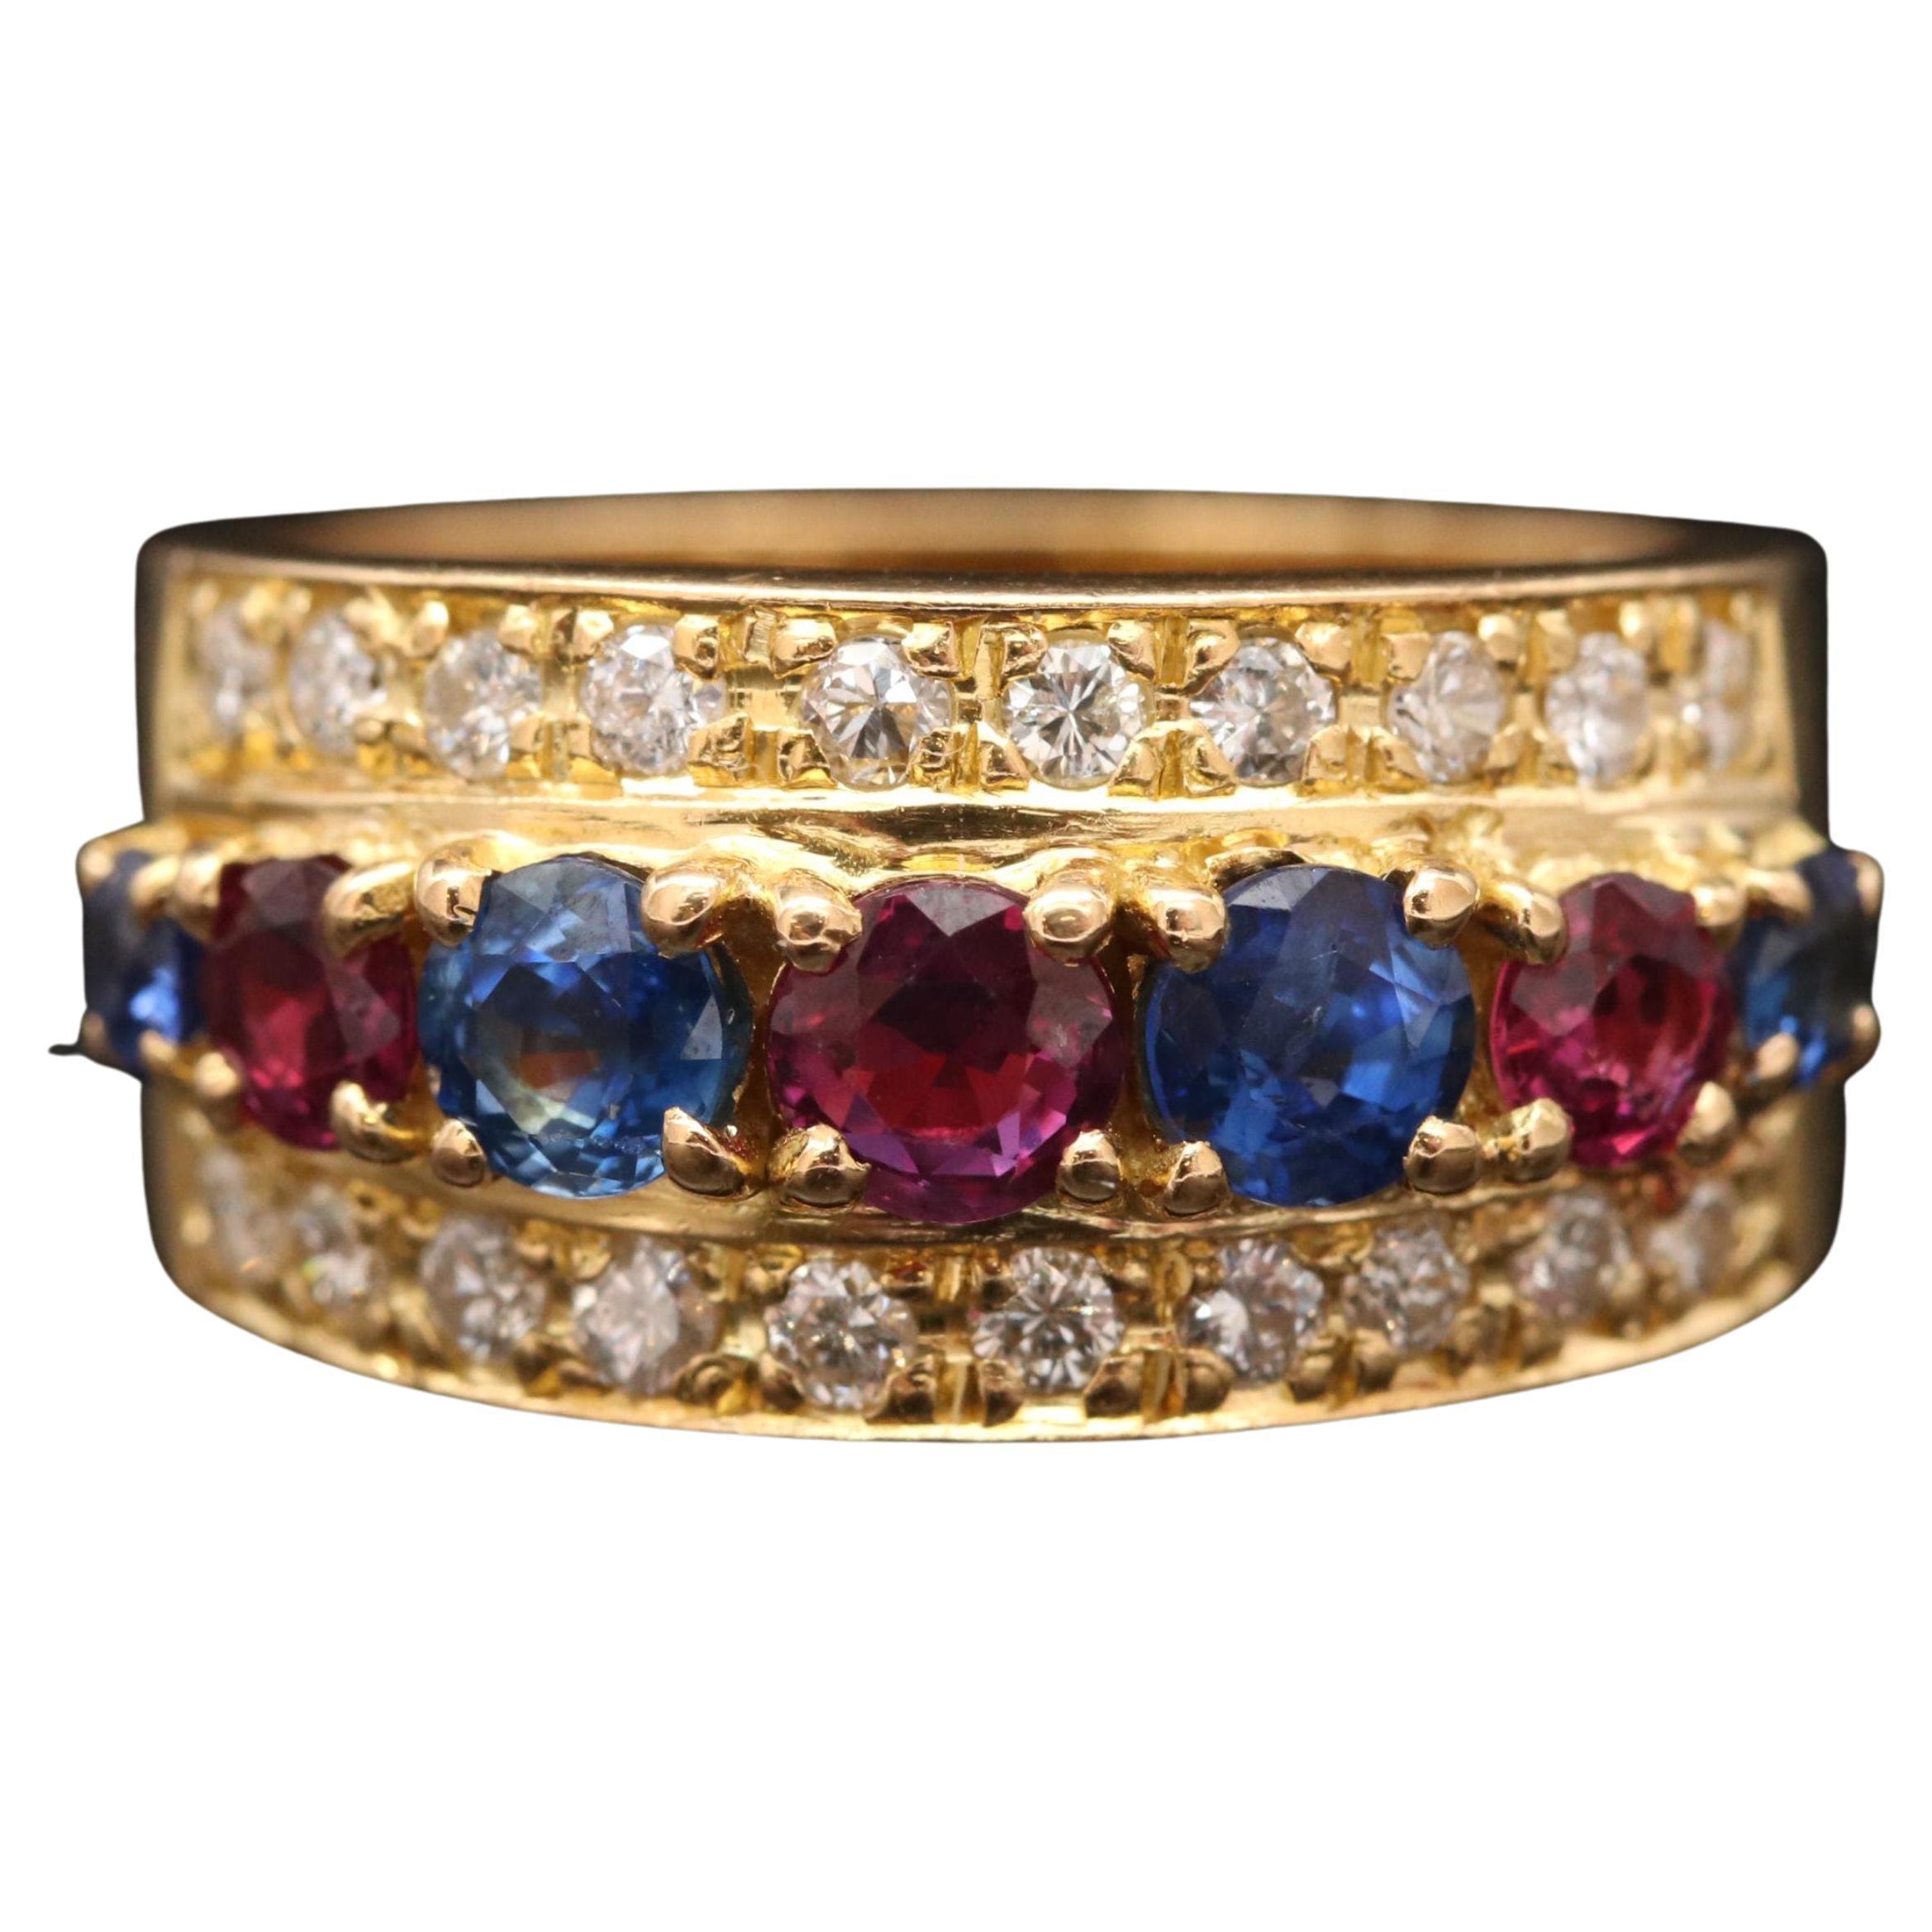 For Sale:  Natural Ruby Sapphire Diamond Engagement Ring Set in 18K Gold, Cocktail Ring